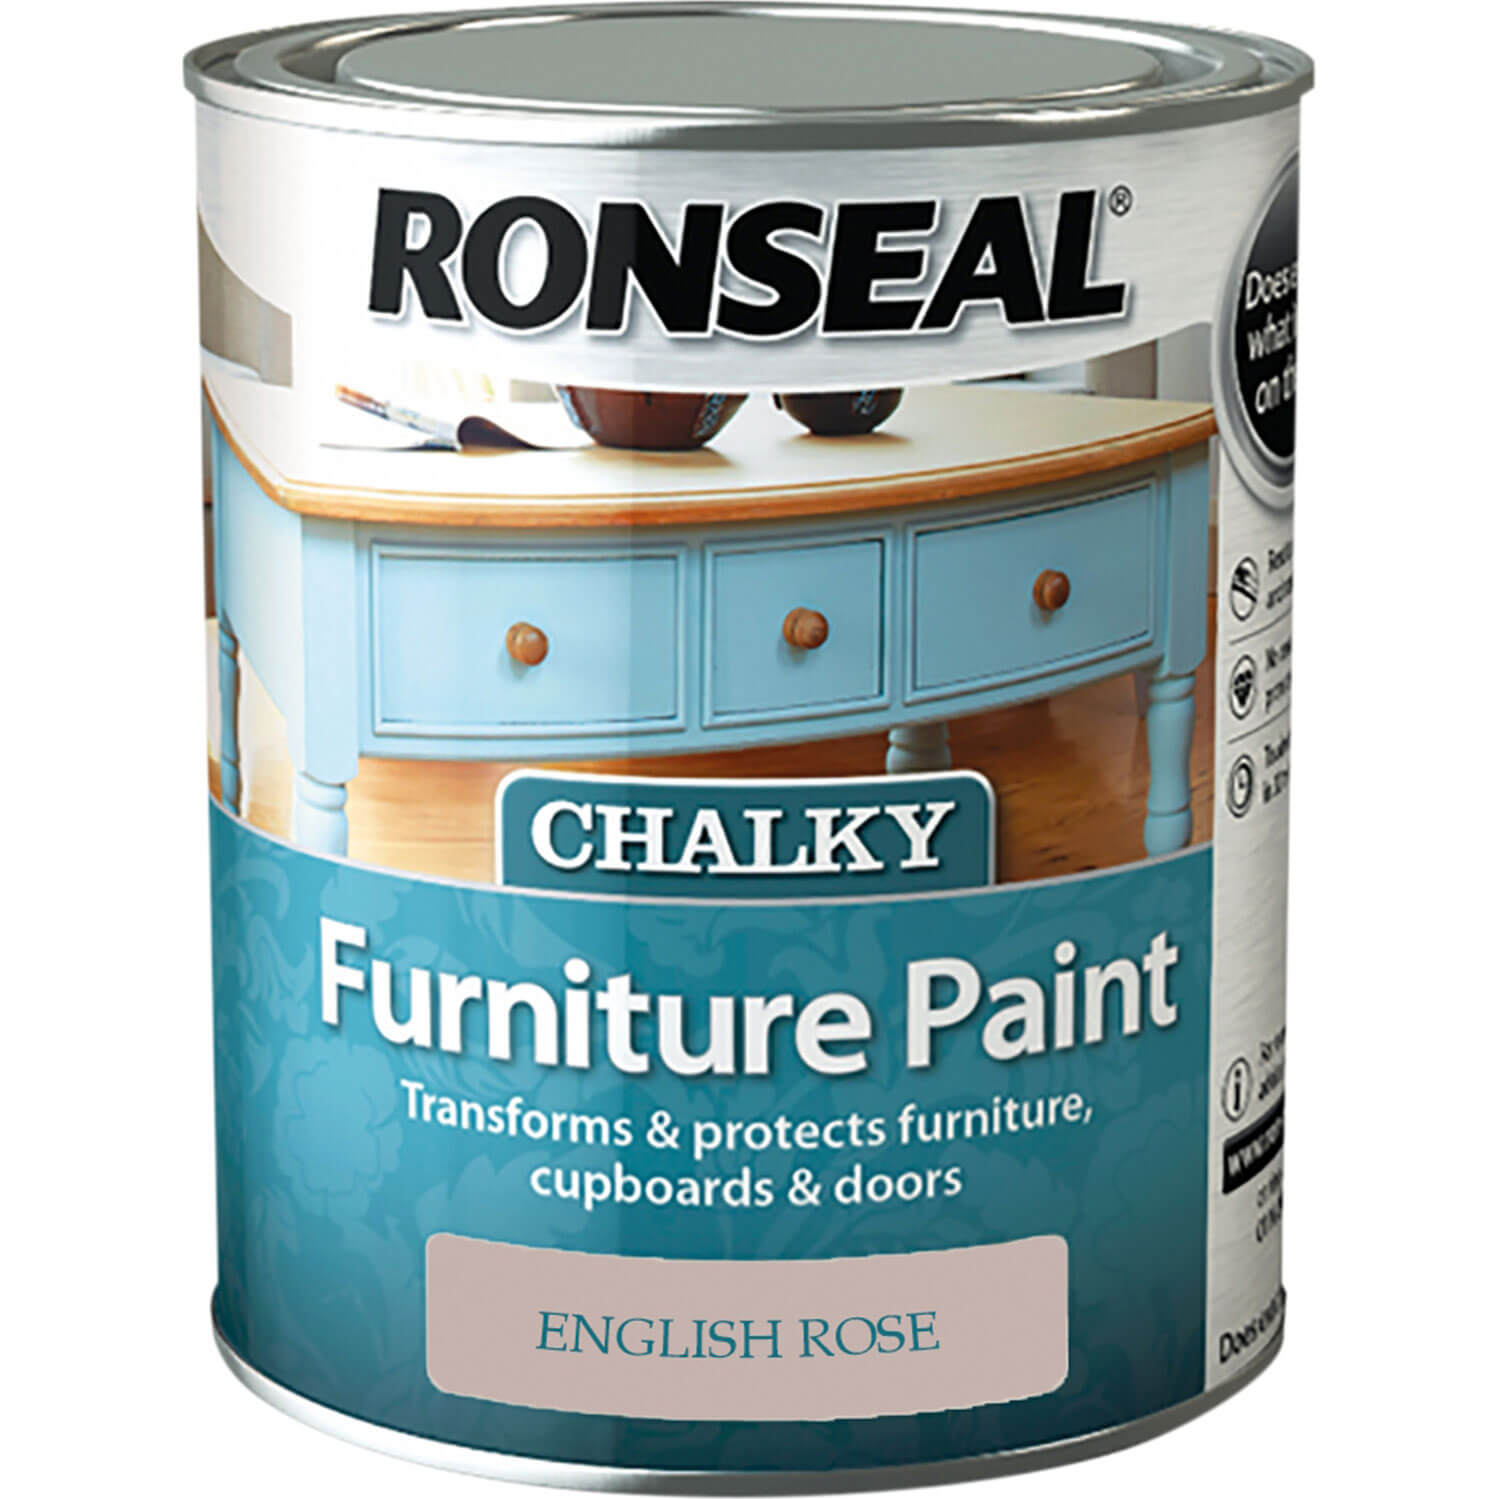 Image of Ronseal Chalky Furniture Paint English Rose 750ml